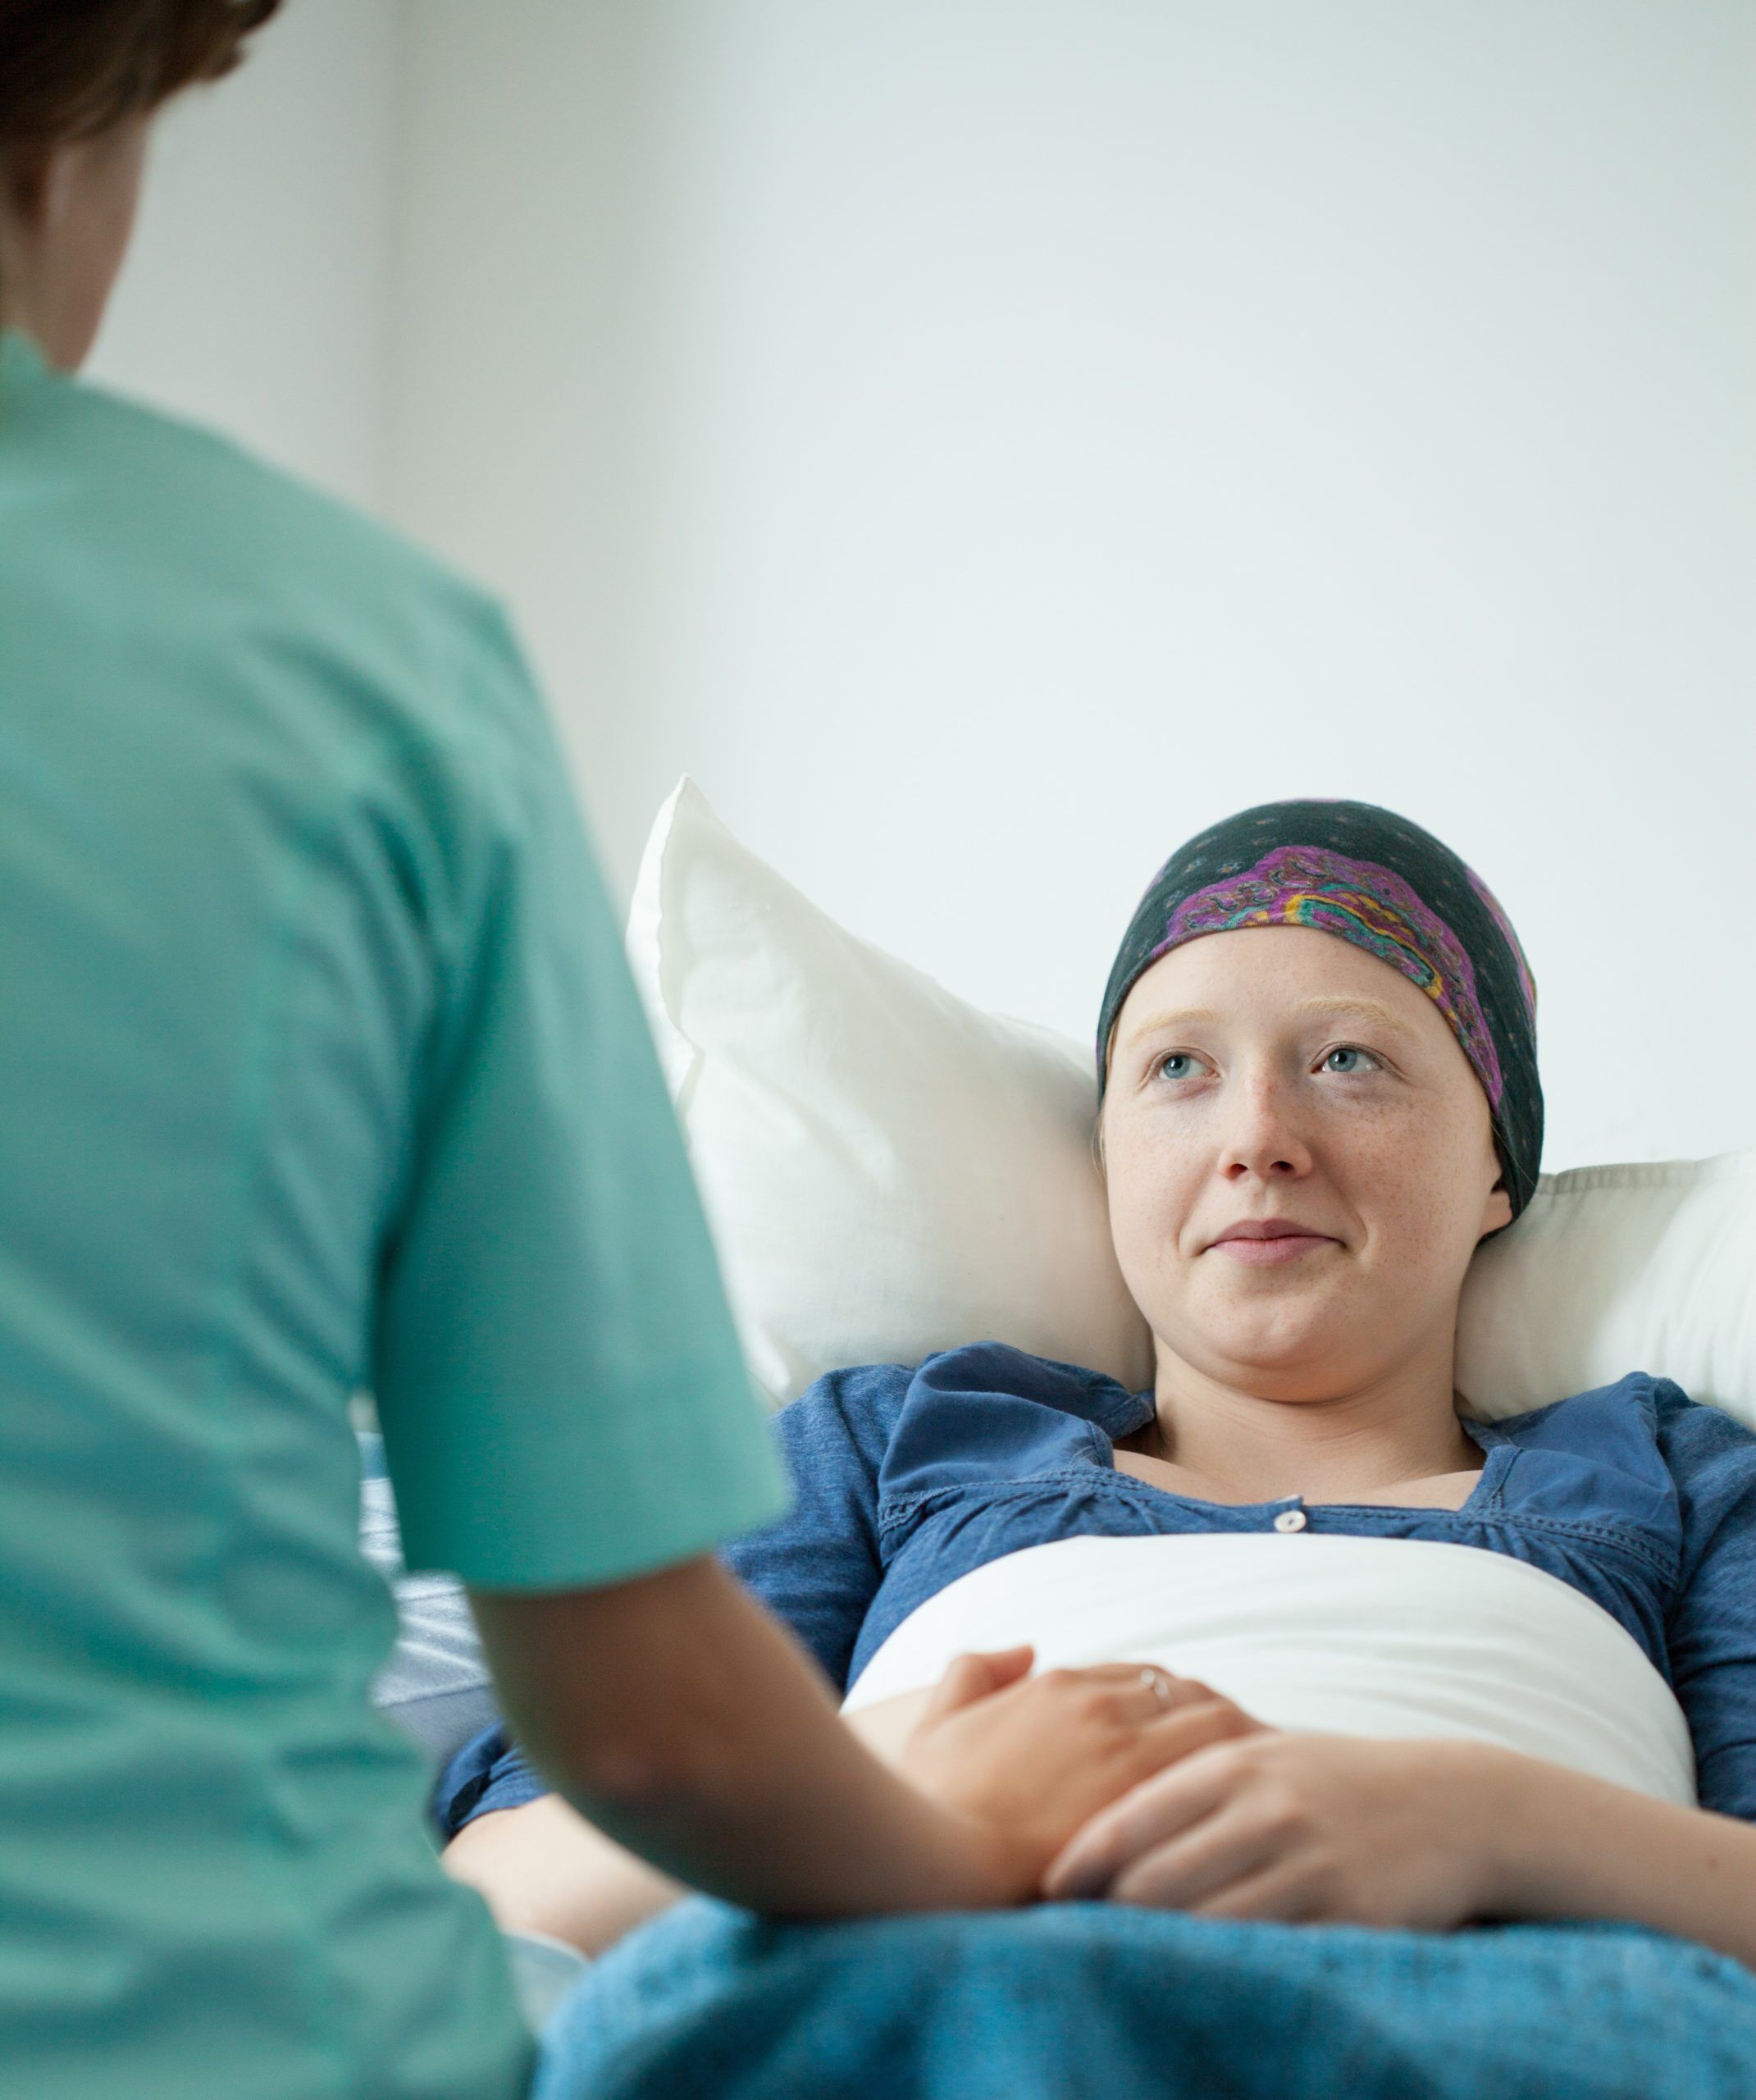 Oncology Nurse Navigation May Mitigate Disparities in Non-Private Insurance Patient Groups